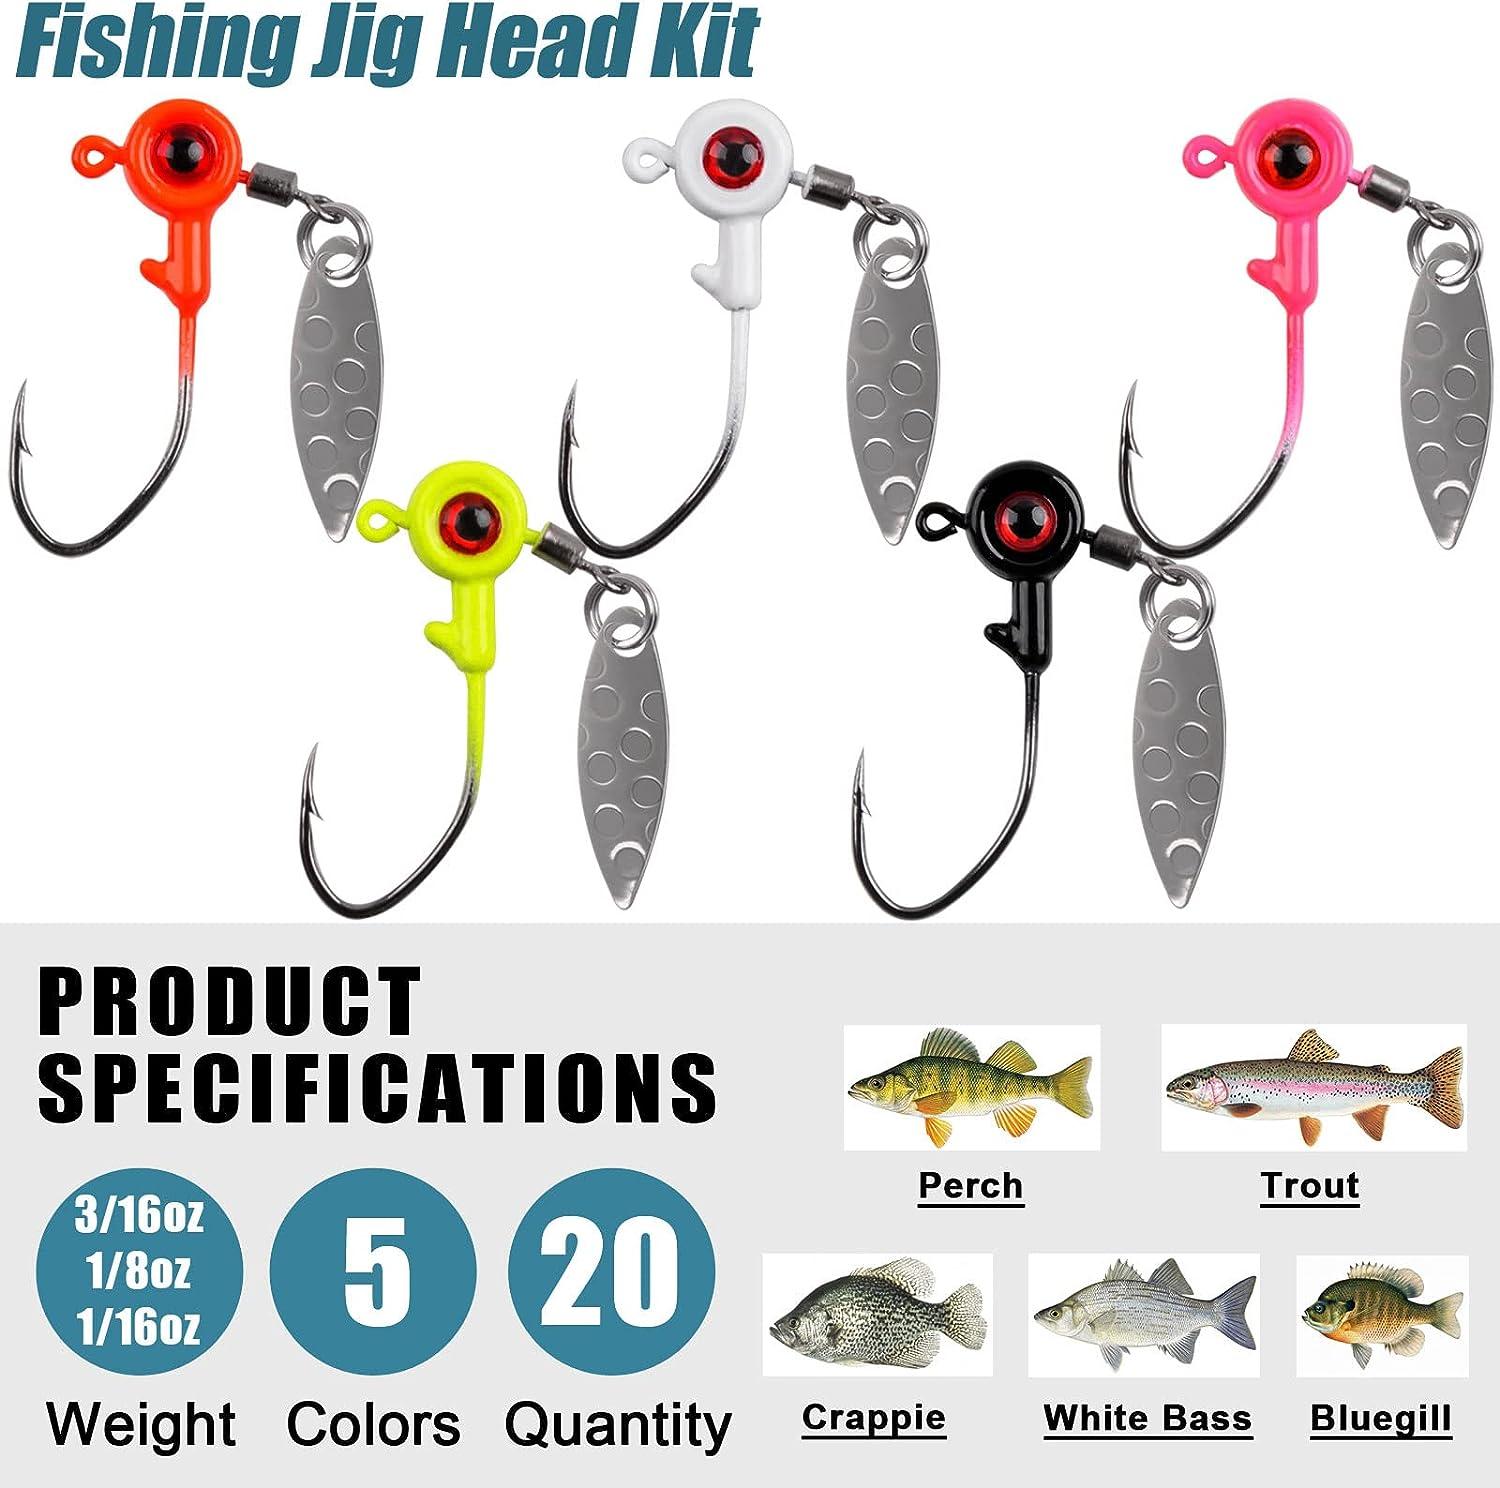 Jig Heads Fishing Hooks Crappie Jig Heads Round Ball Unpainted Head Jig  Hooks with Barb Sharp Fishing Jig Heads for Bass Trout Crappie Walleye  Panfish